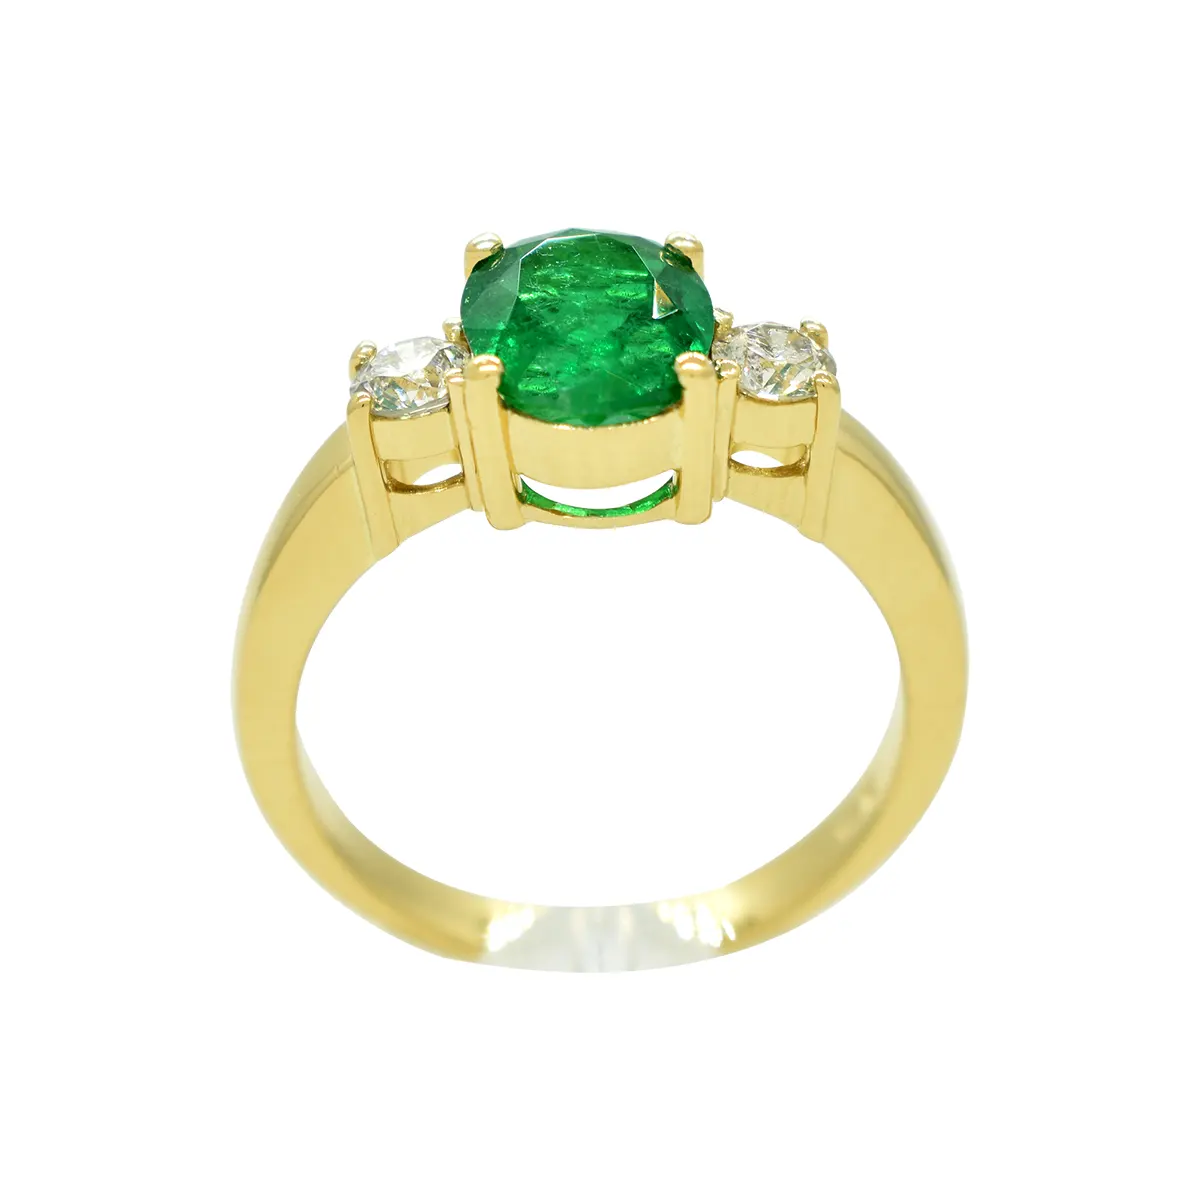 The prong setting in this ring elevates the stones, allowing them to catch light from various angles and creating a dazzling display of color and sparkle